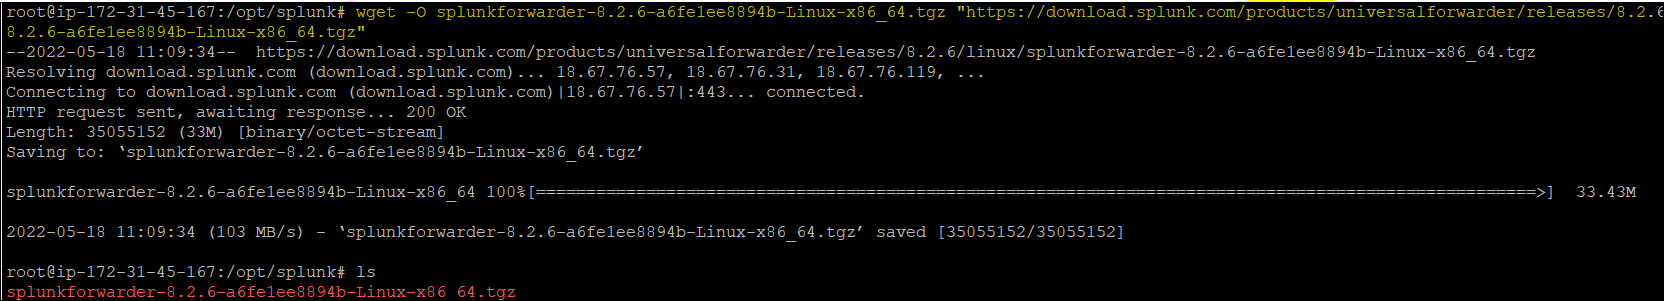 Downloading the Splunk Universal Forwarder with wget Command